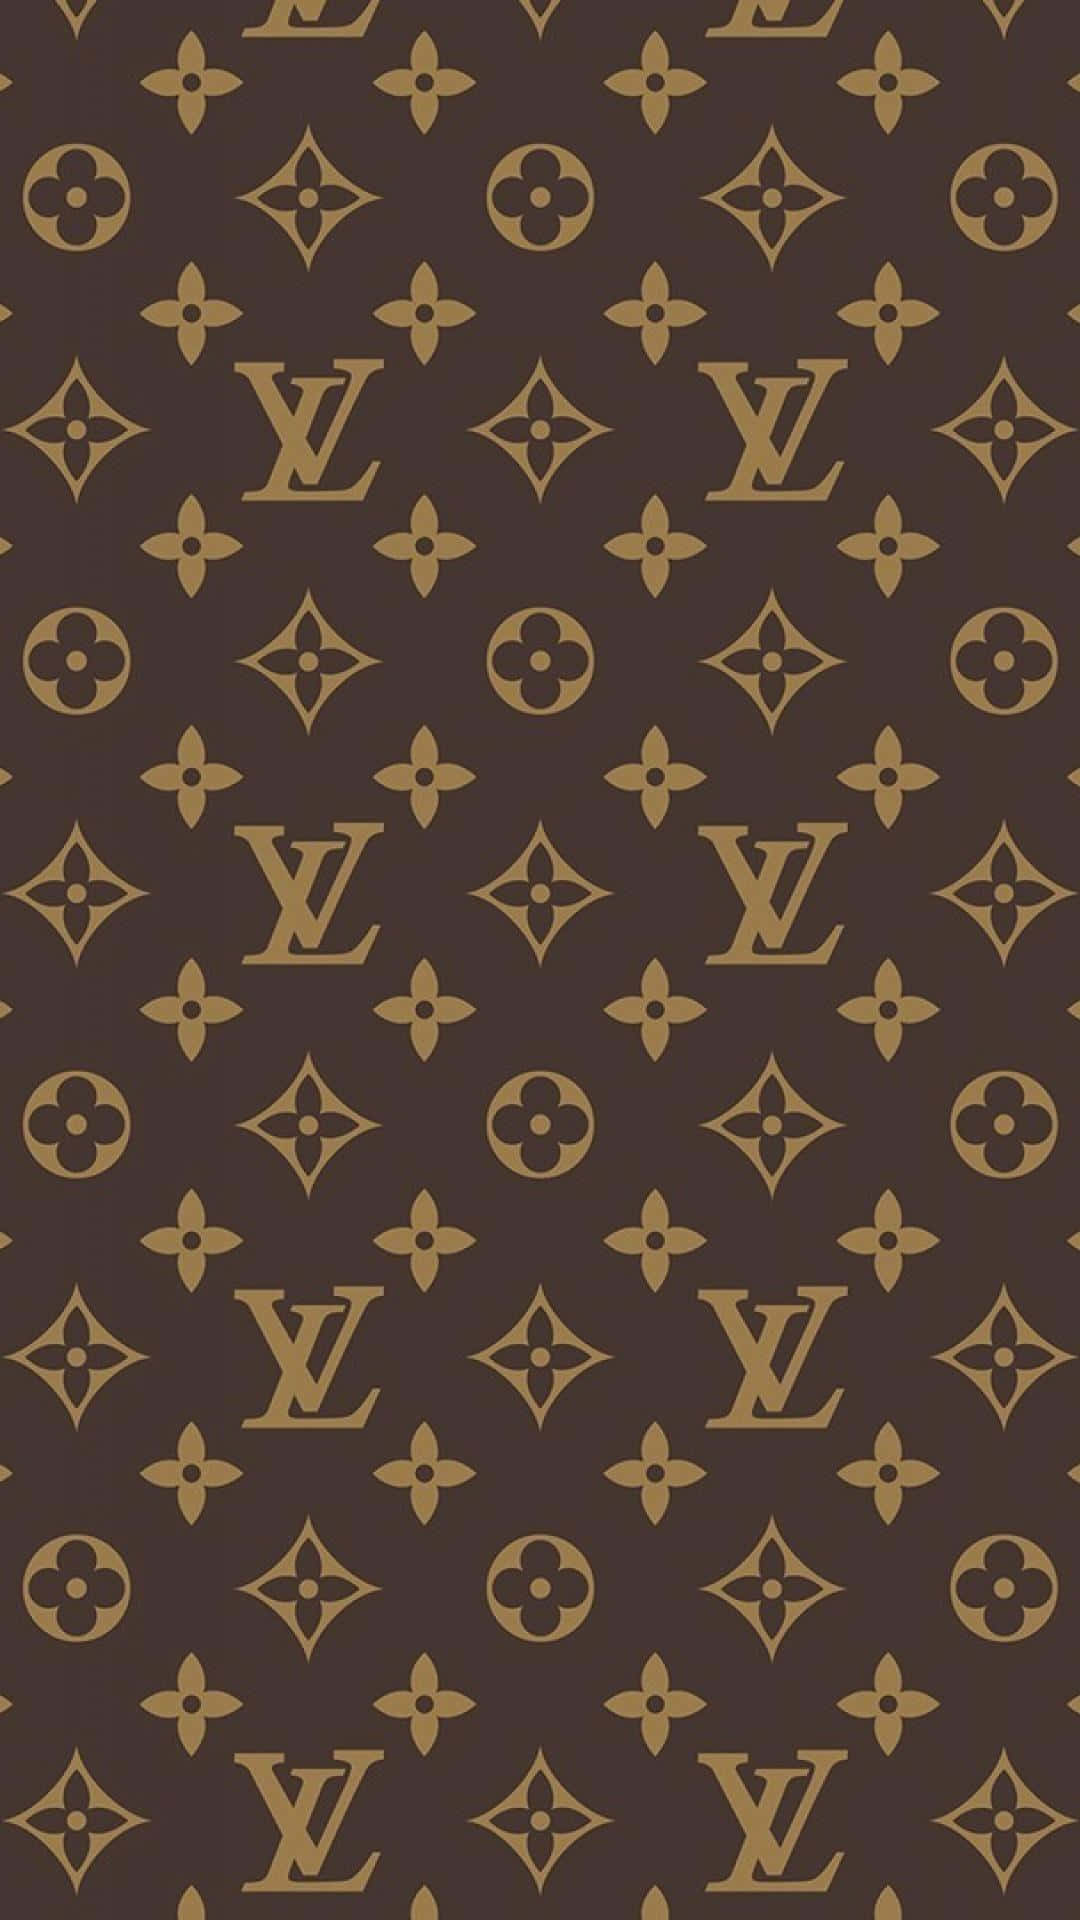 Download Louis Vuitton Monogram Pattern In Brown And Gold Wallpaper